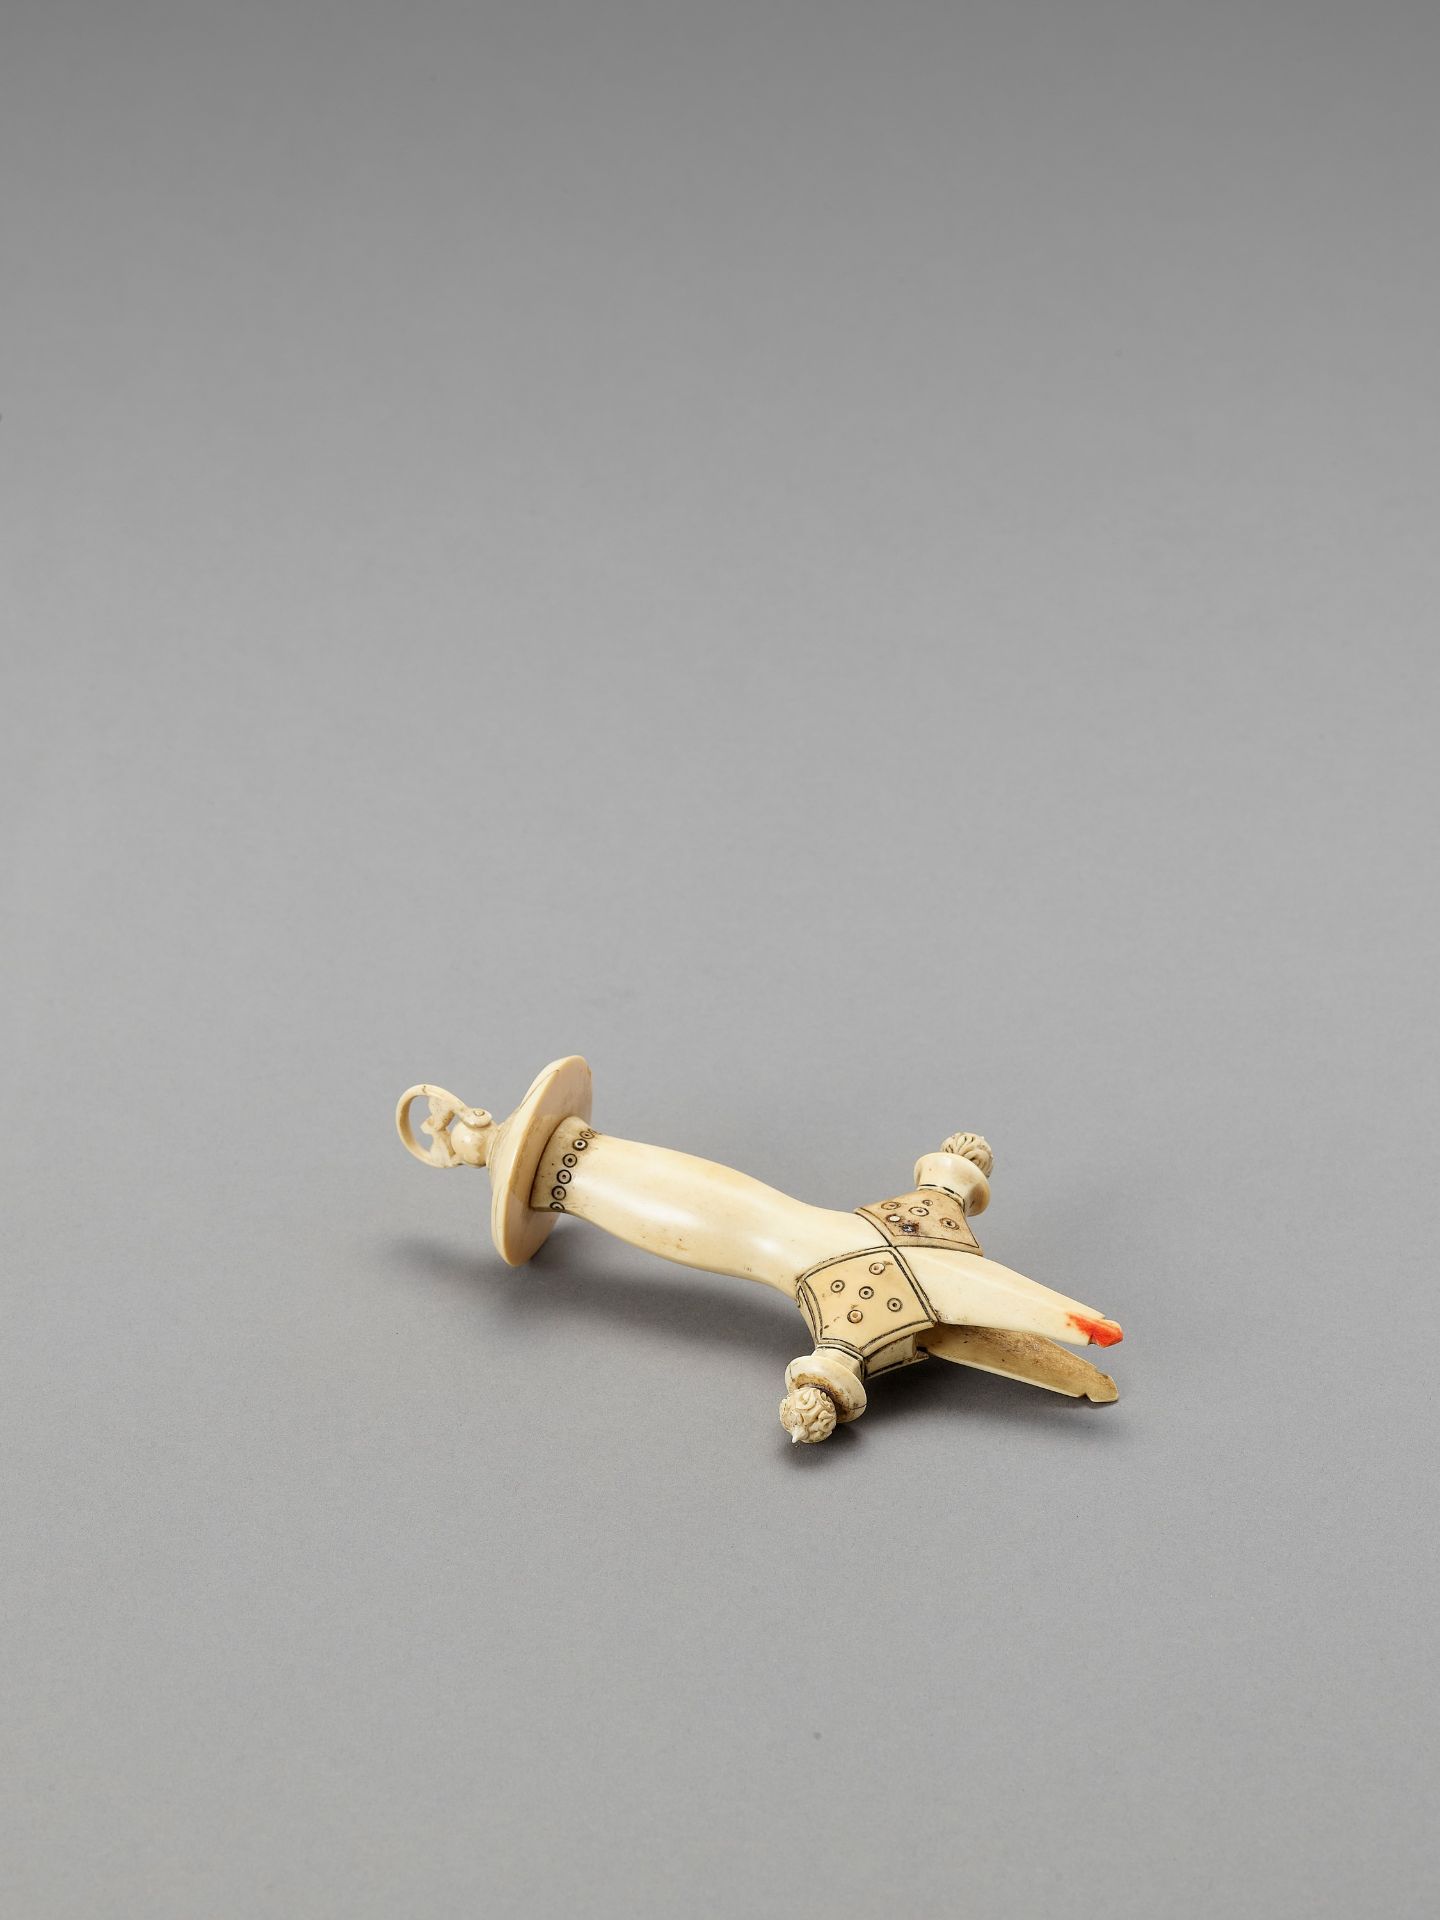 AN INDIAN IVORY SWORD HANDLE - Image 3 of 4